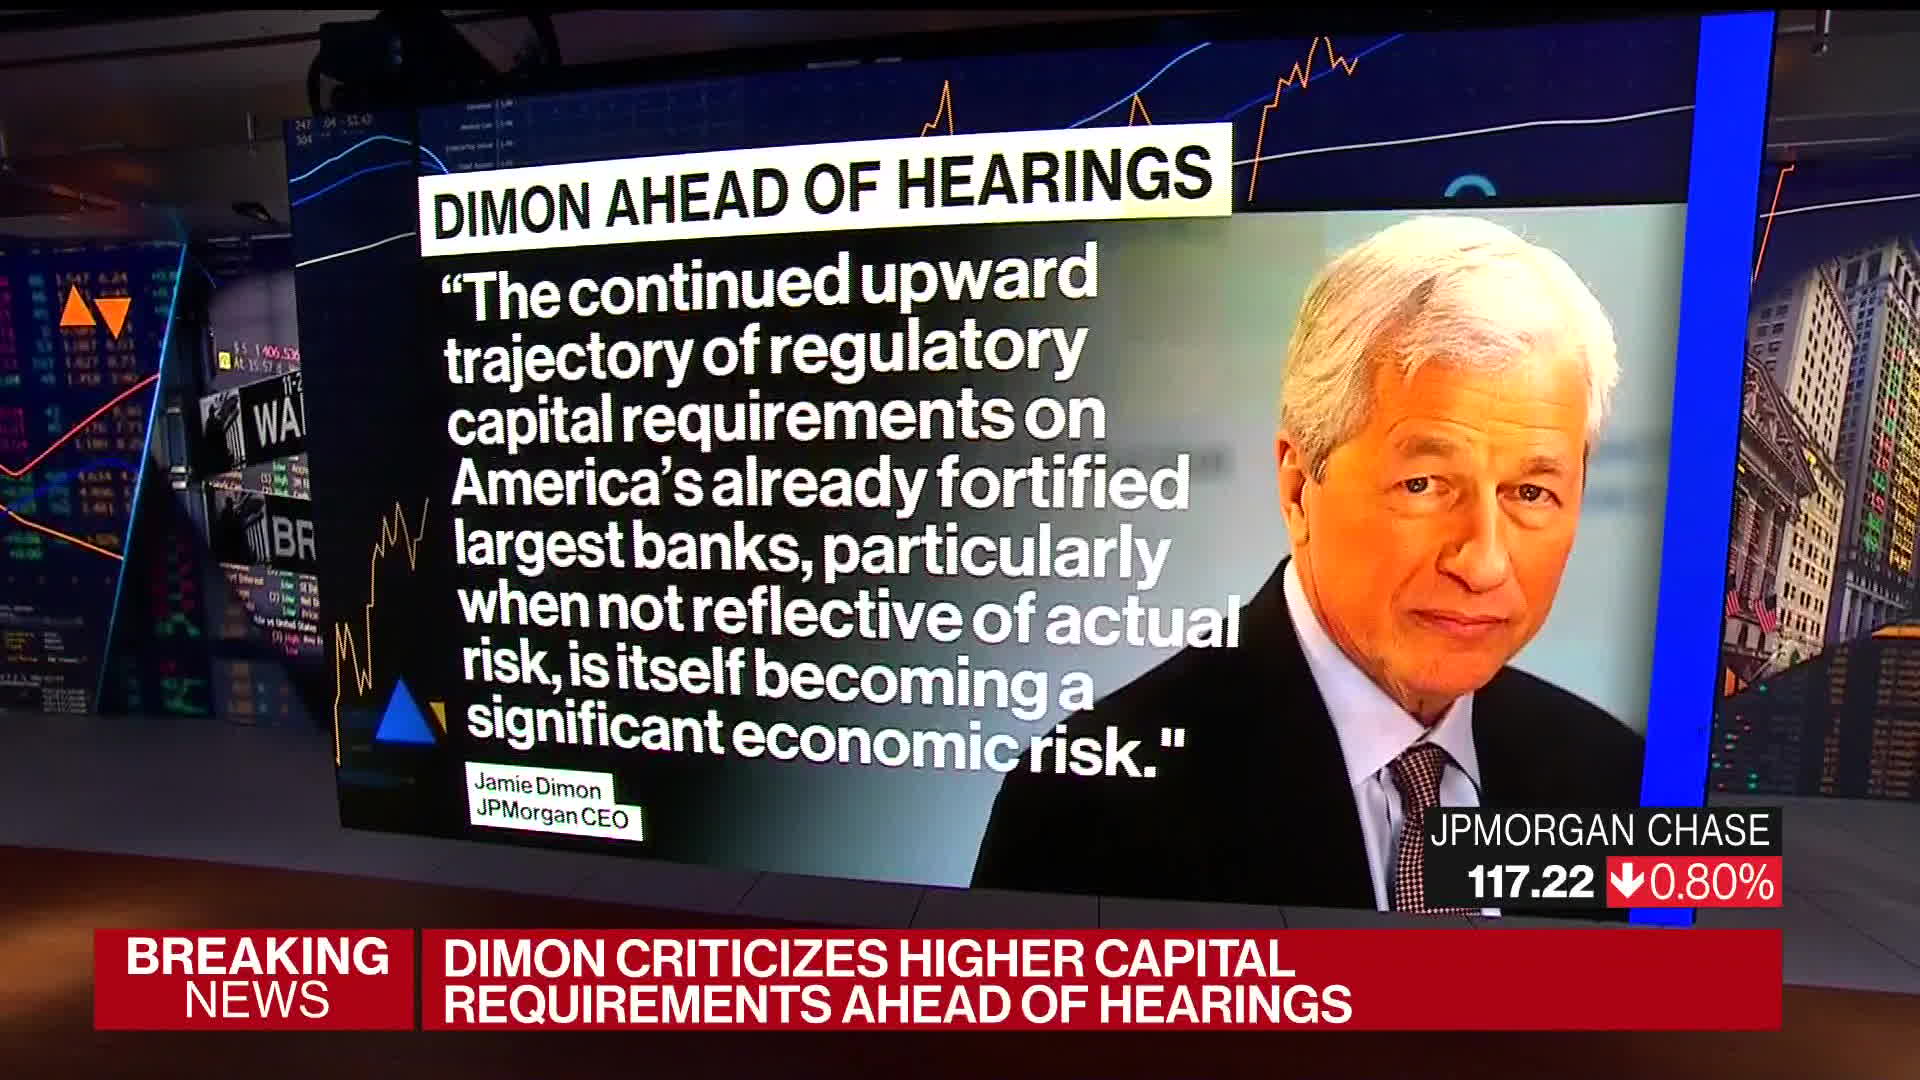 Blasts　Requirements　Dimon　DC　Higher　Jamie　as　Washington,　to　Capital　Head　CEOs　Bloomberg